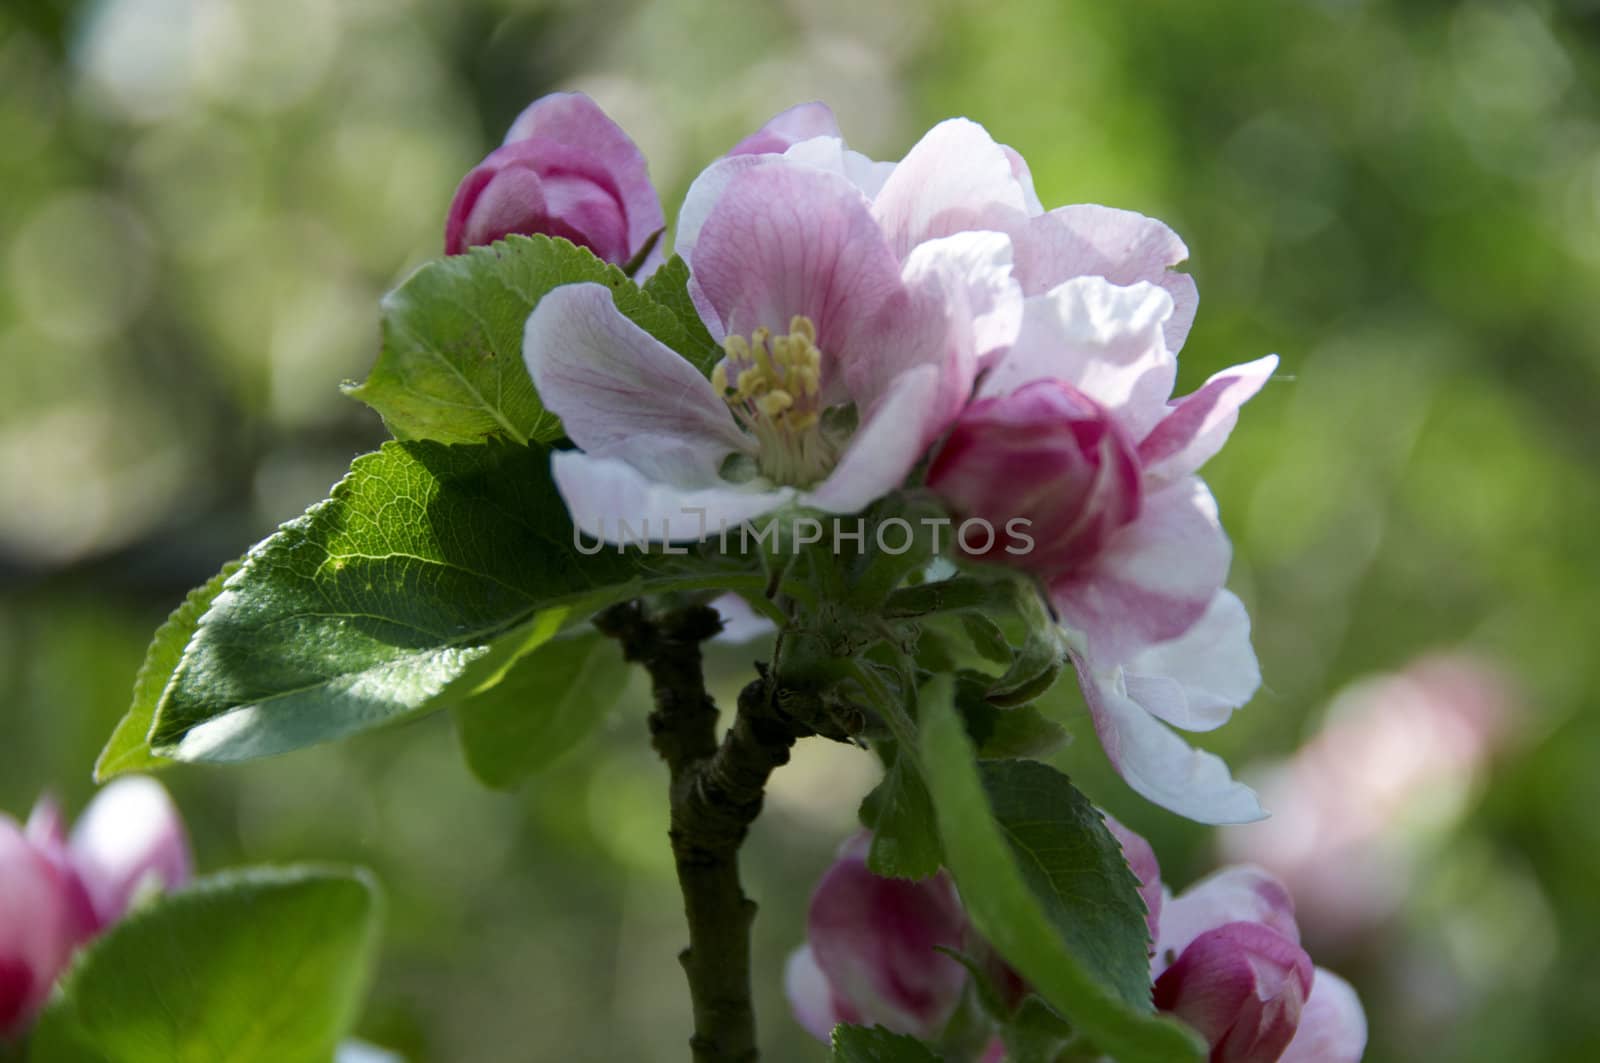 Detail of some apple blossom on a tree